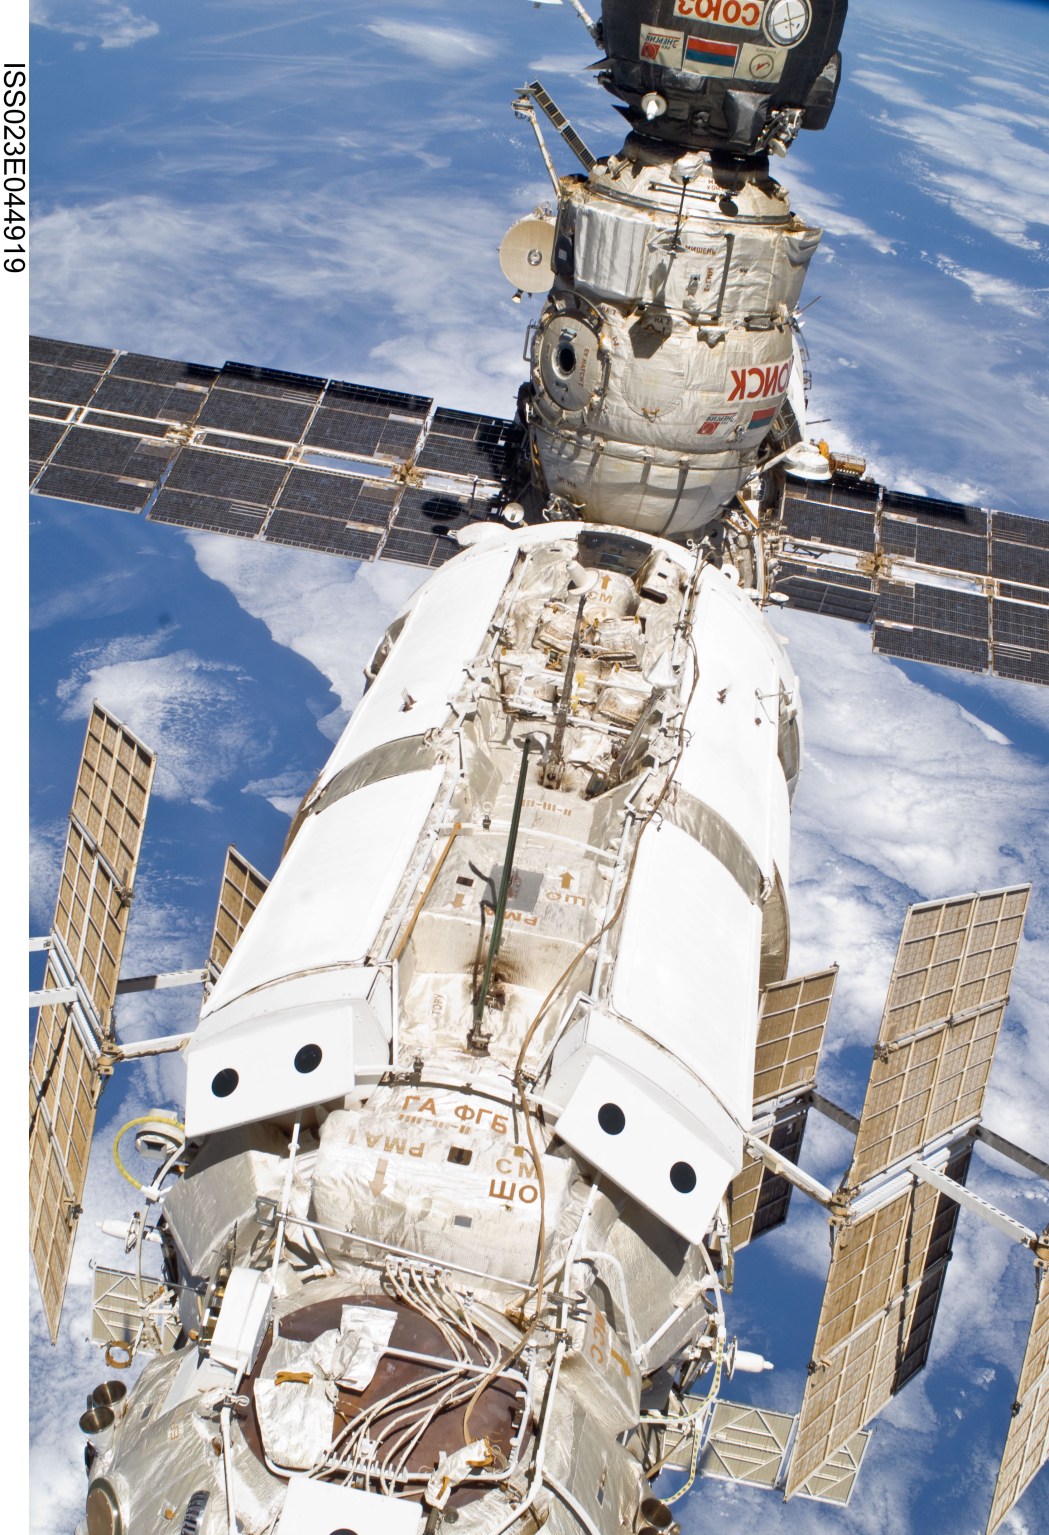 The Poisk module is pictured attached to the Zvezda service module's space-facing port.